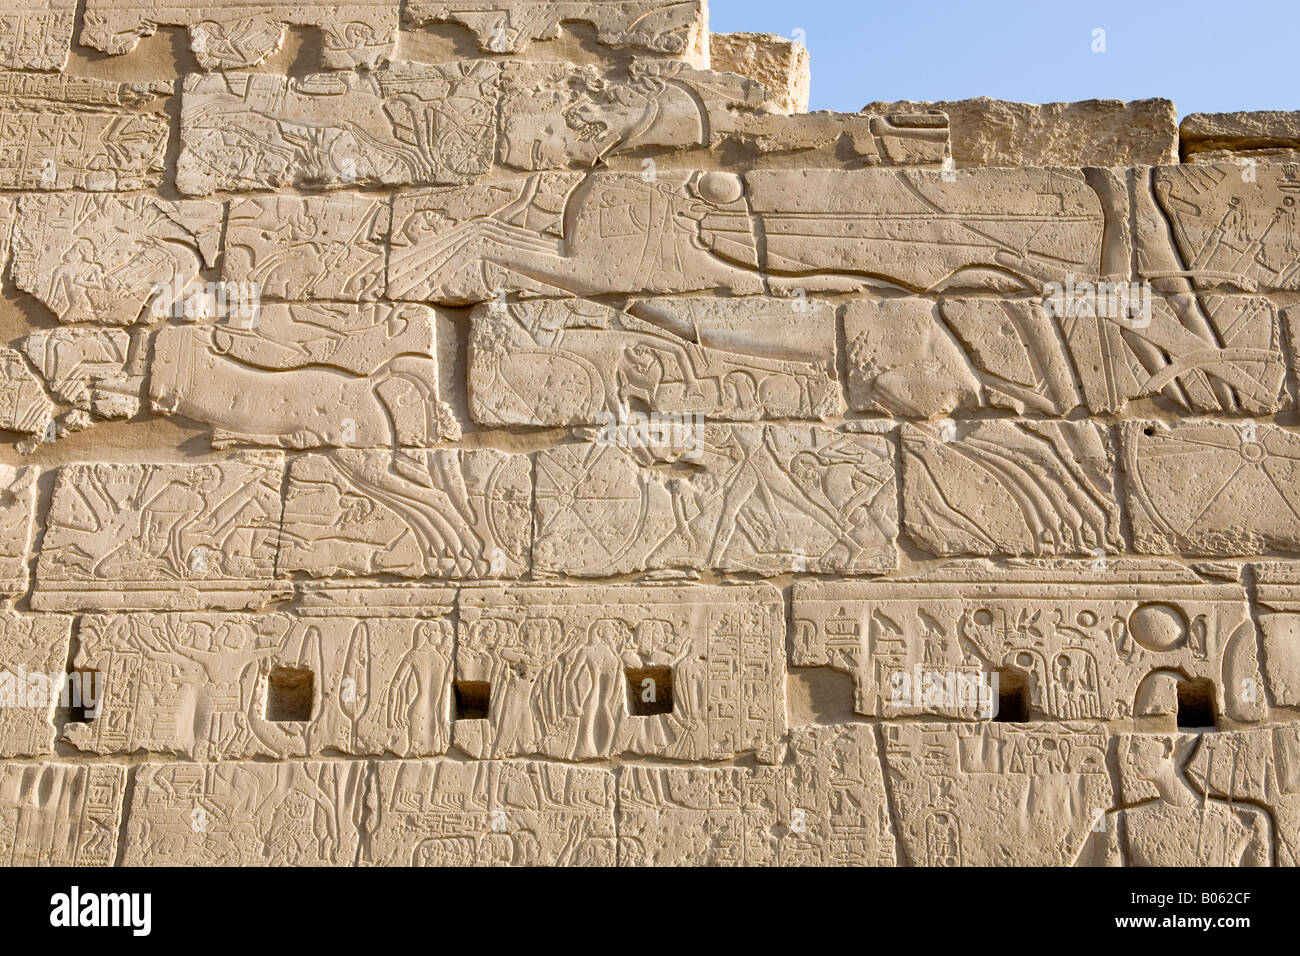 Carved relief wall at Luxor Temple Egypt Stock Photo